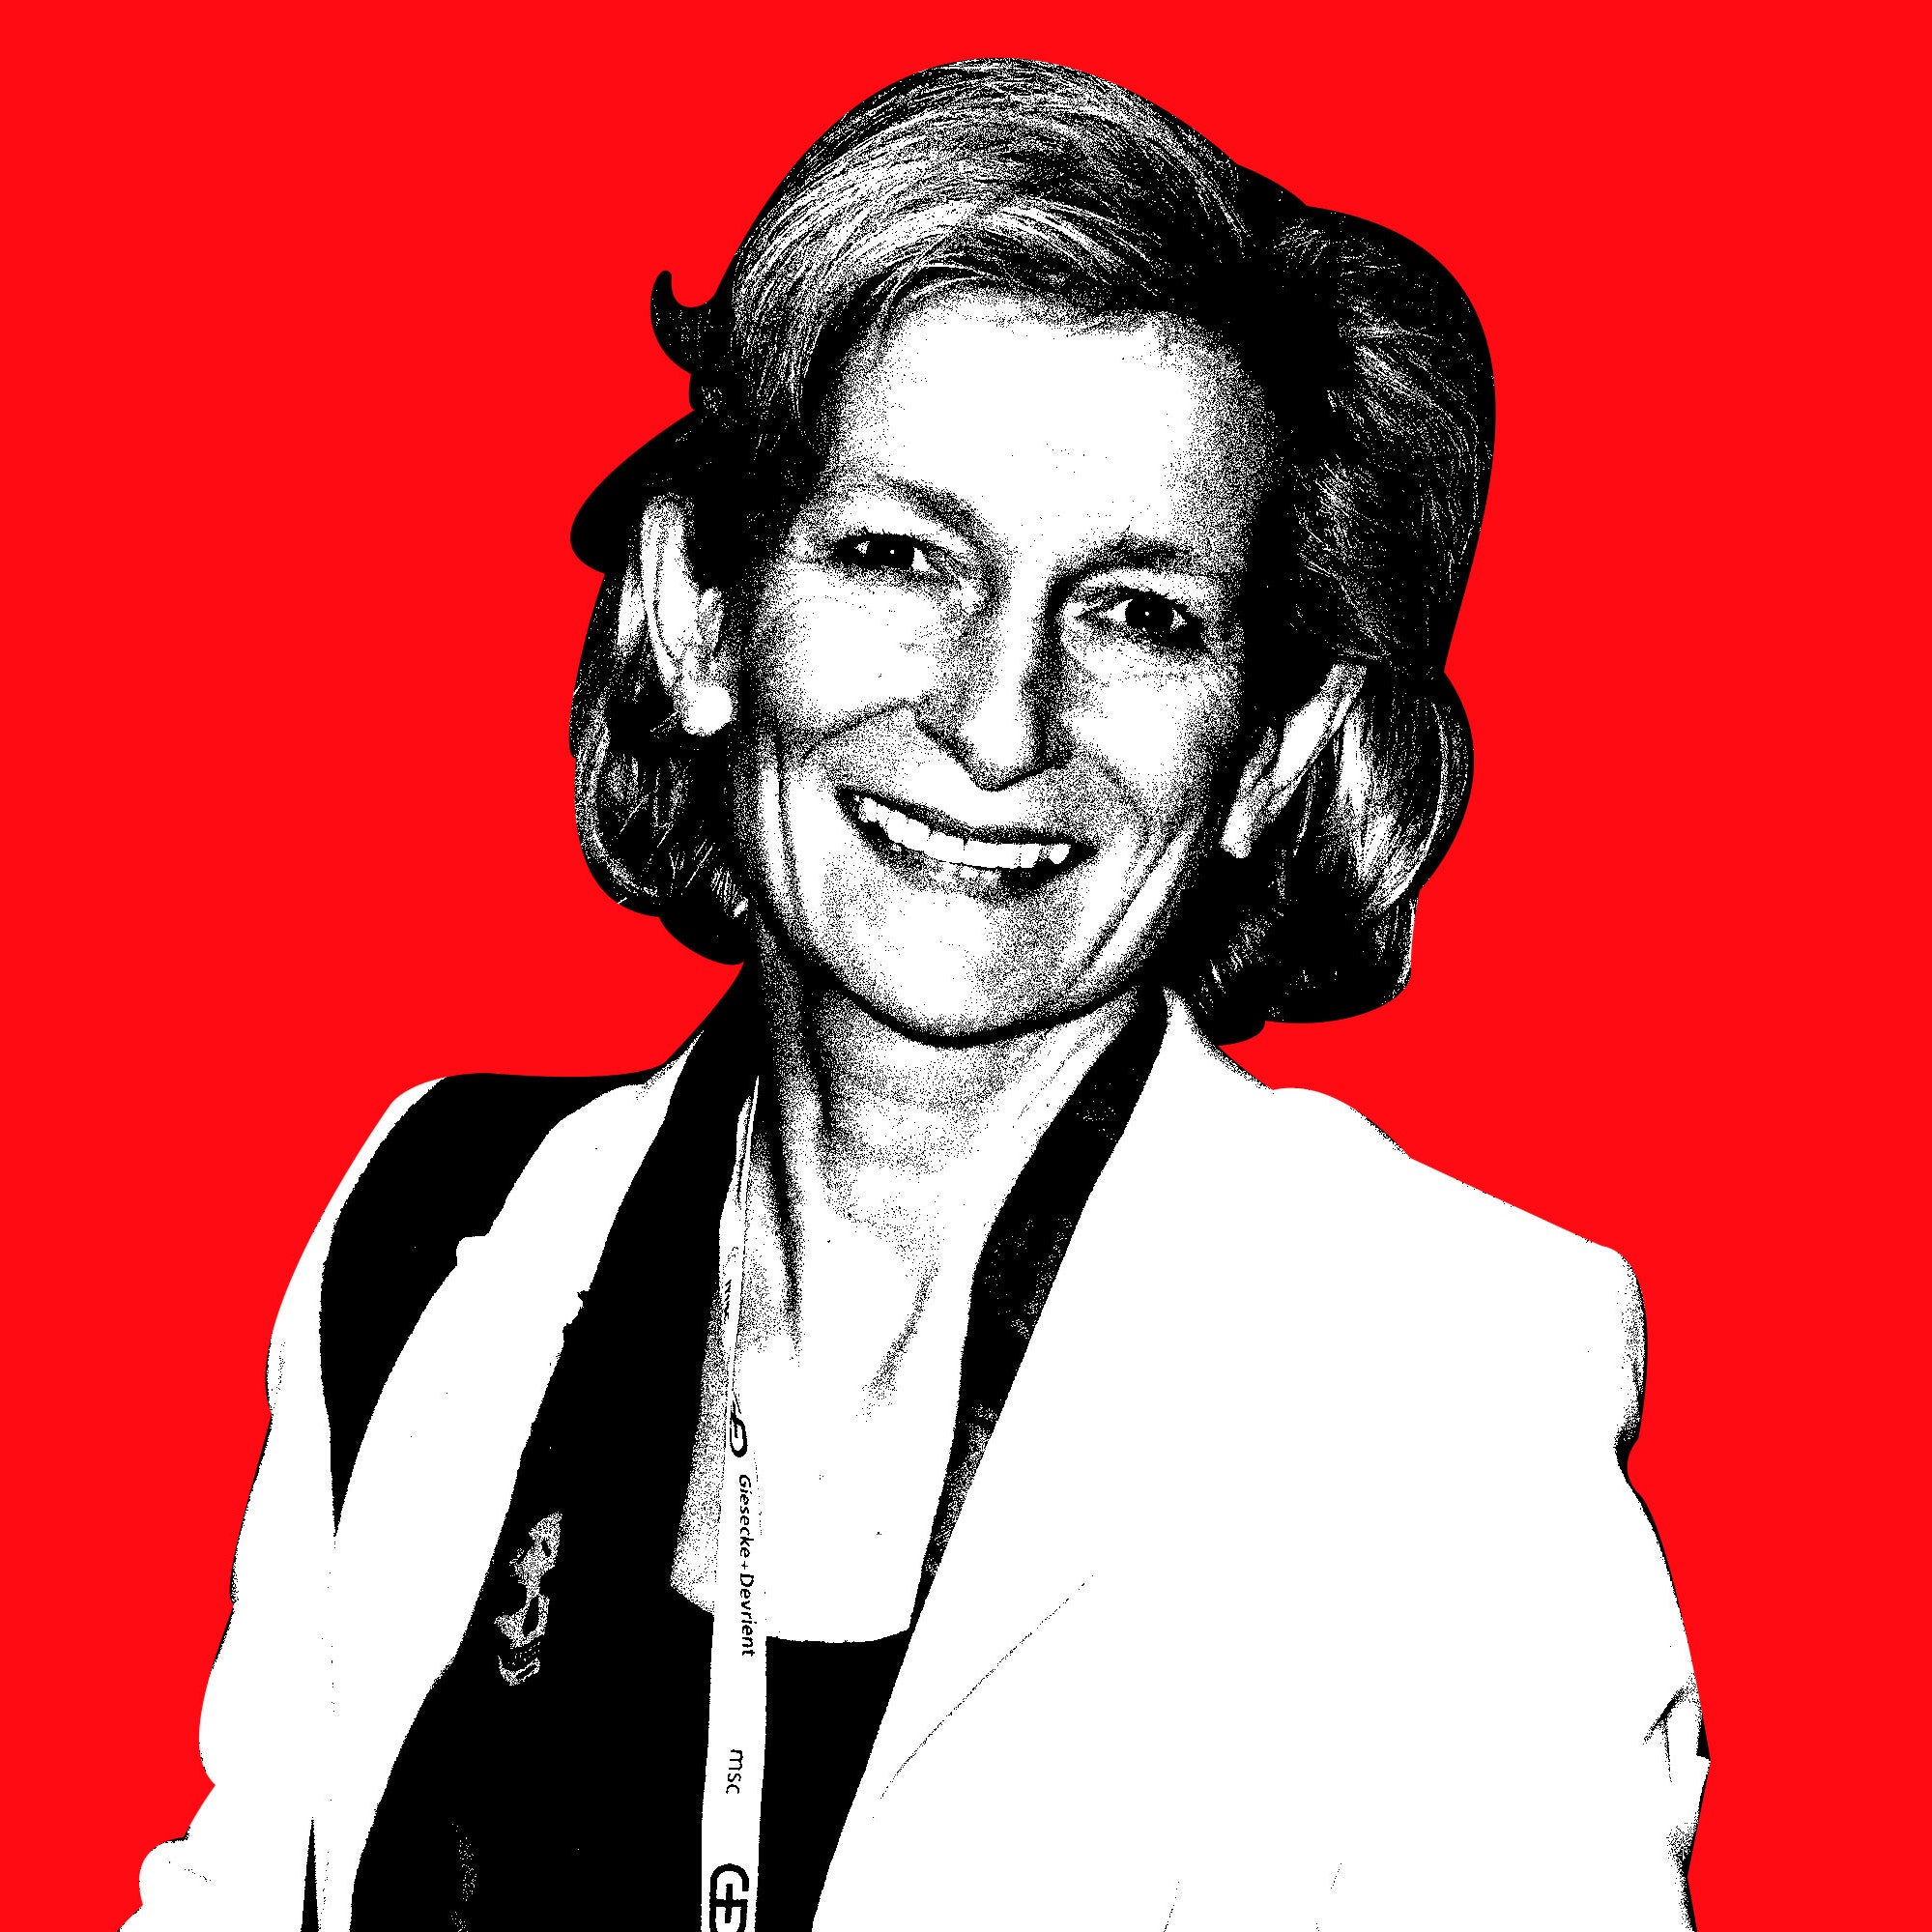 Zanny Minton Beddoes Wants The Economist to Be More “Present” in the Media Conversation